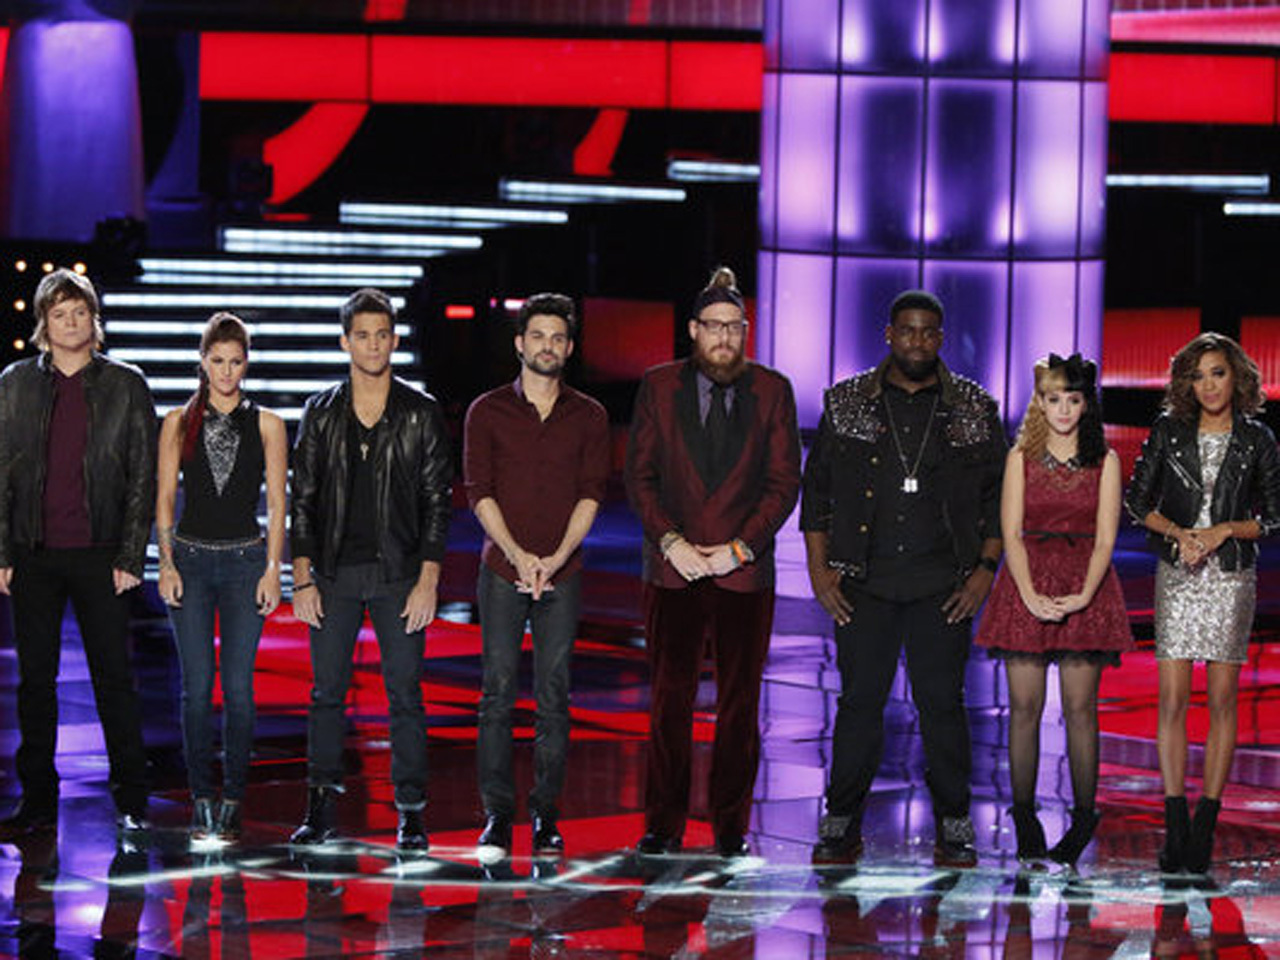 "The Voice's" final 6 contestants are revealed CBS News